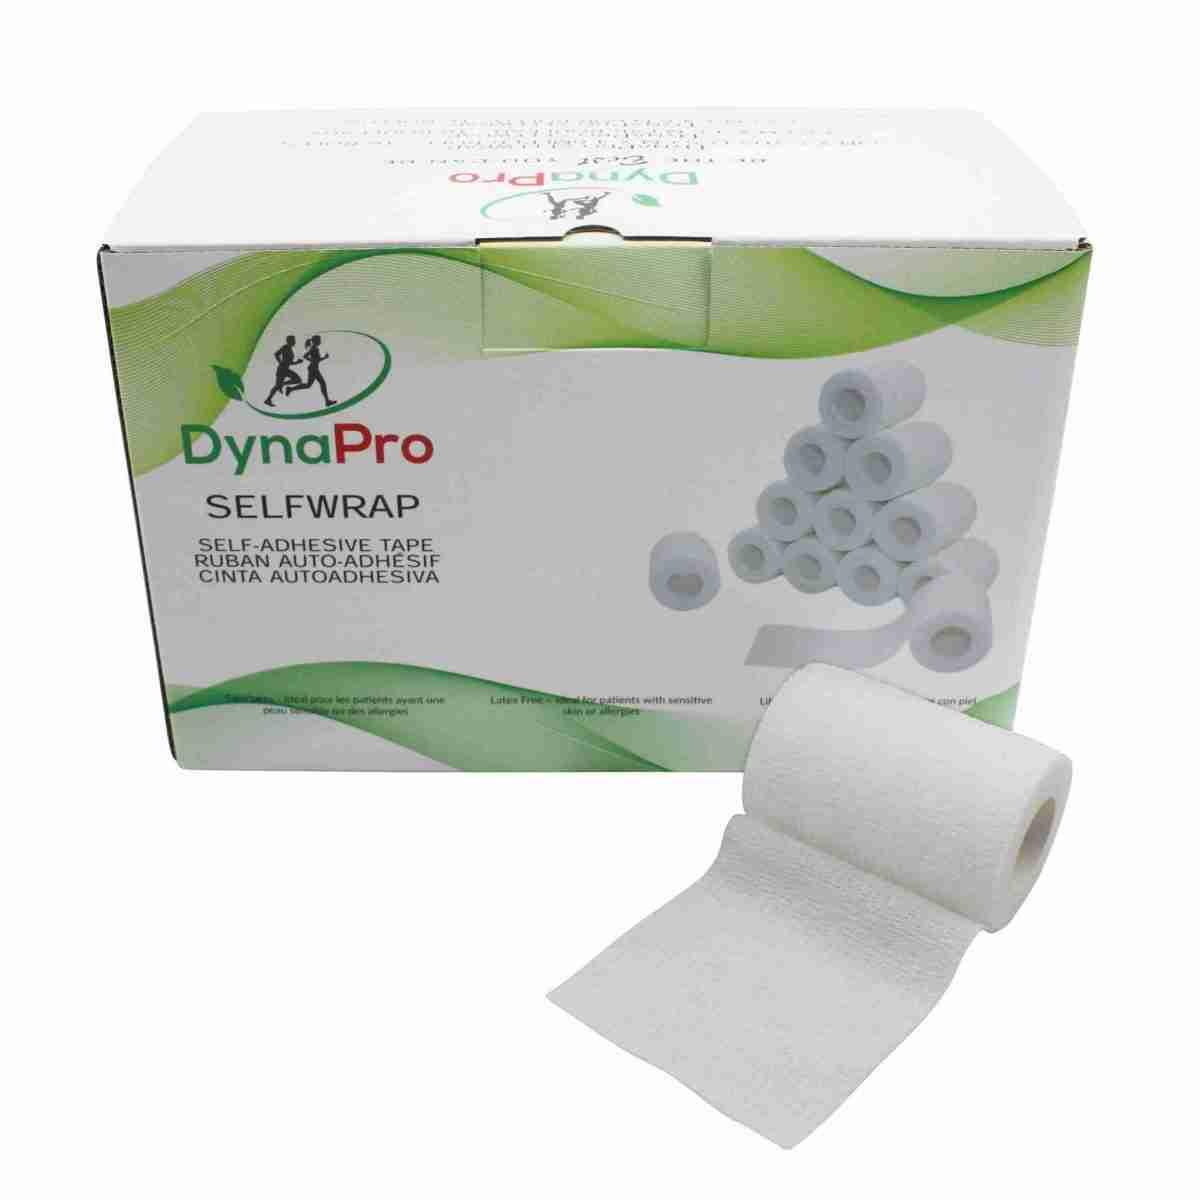 DynaPro SelfWrap Case and Roll